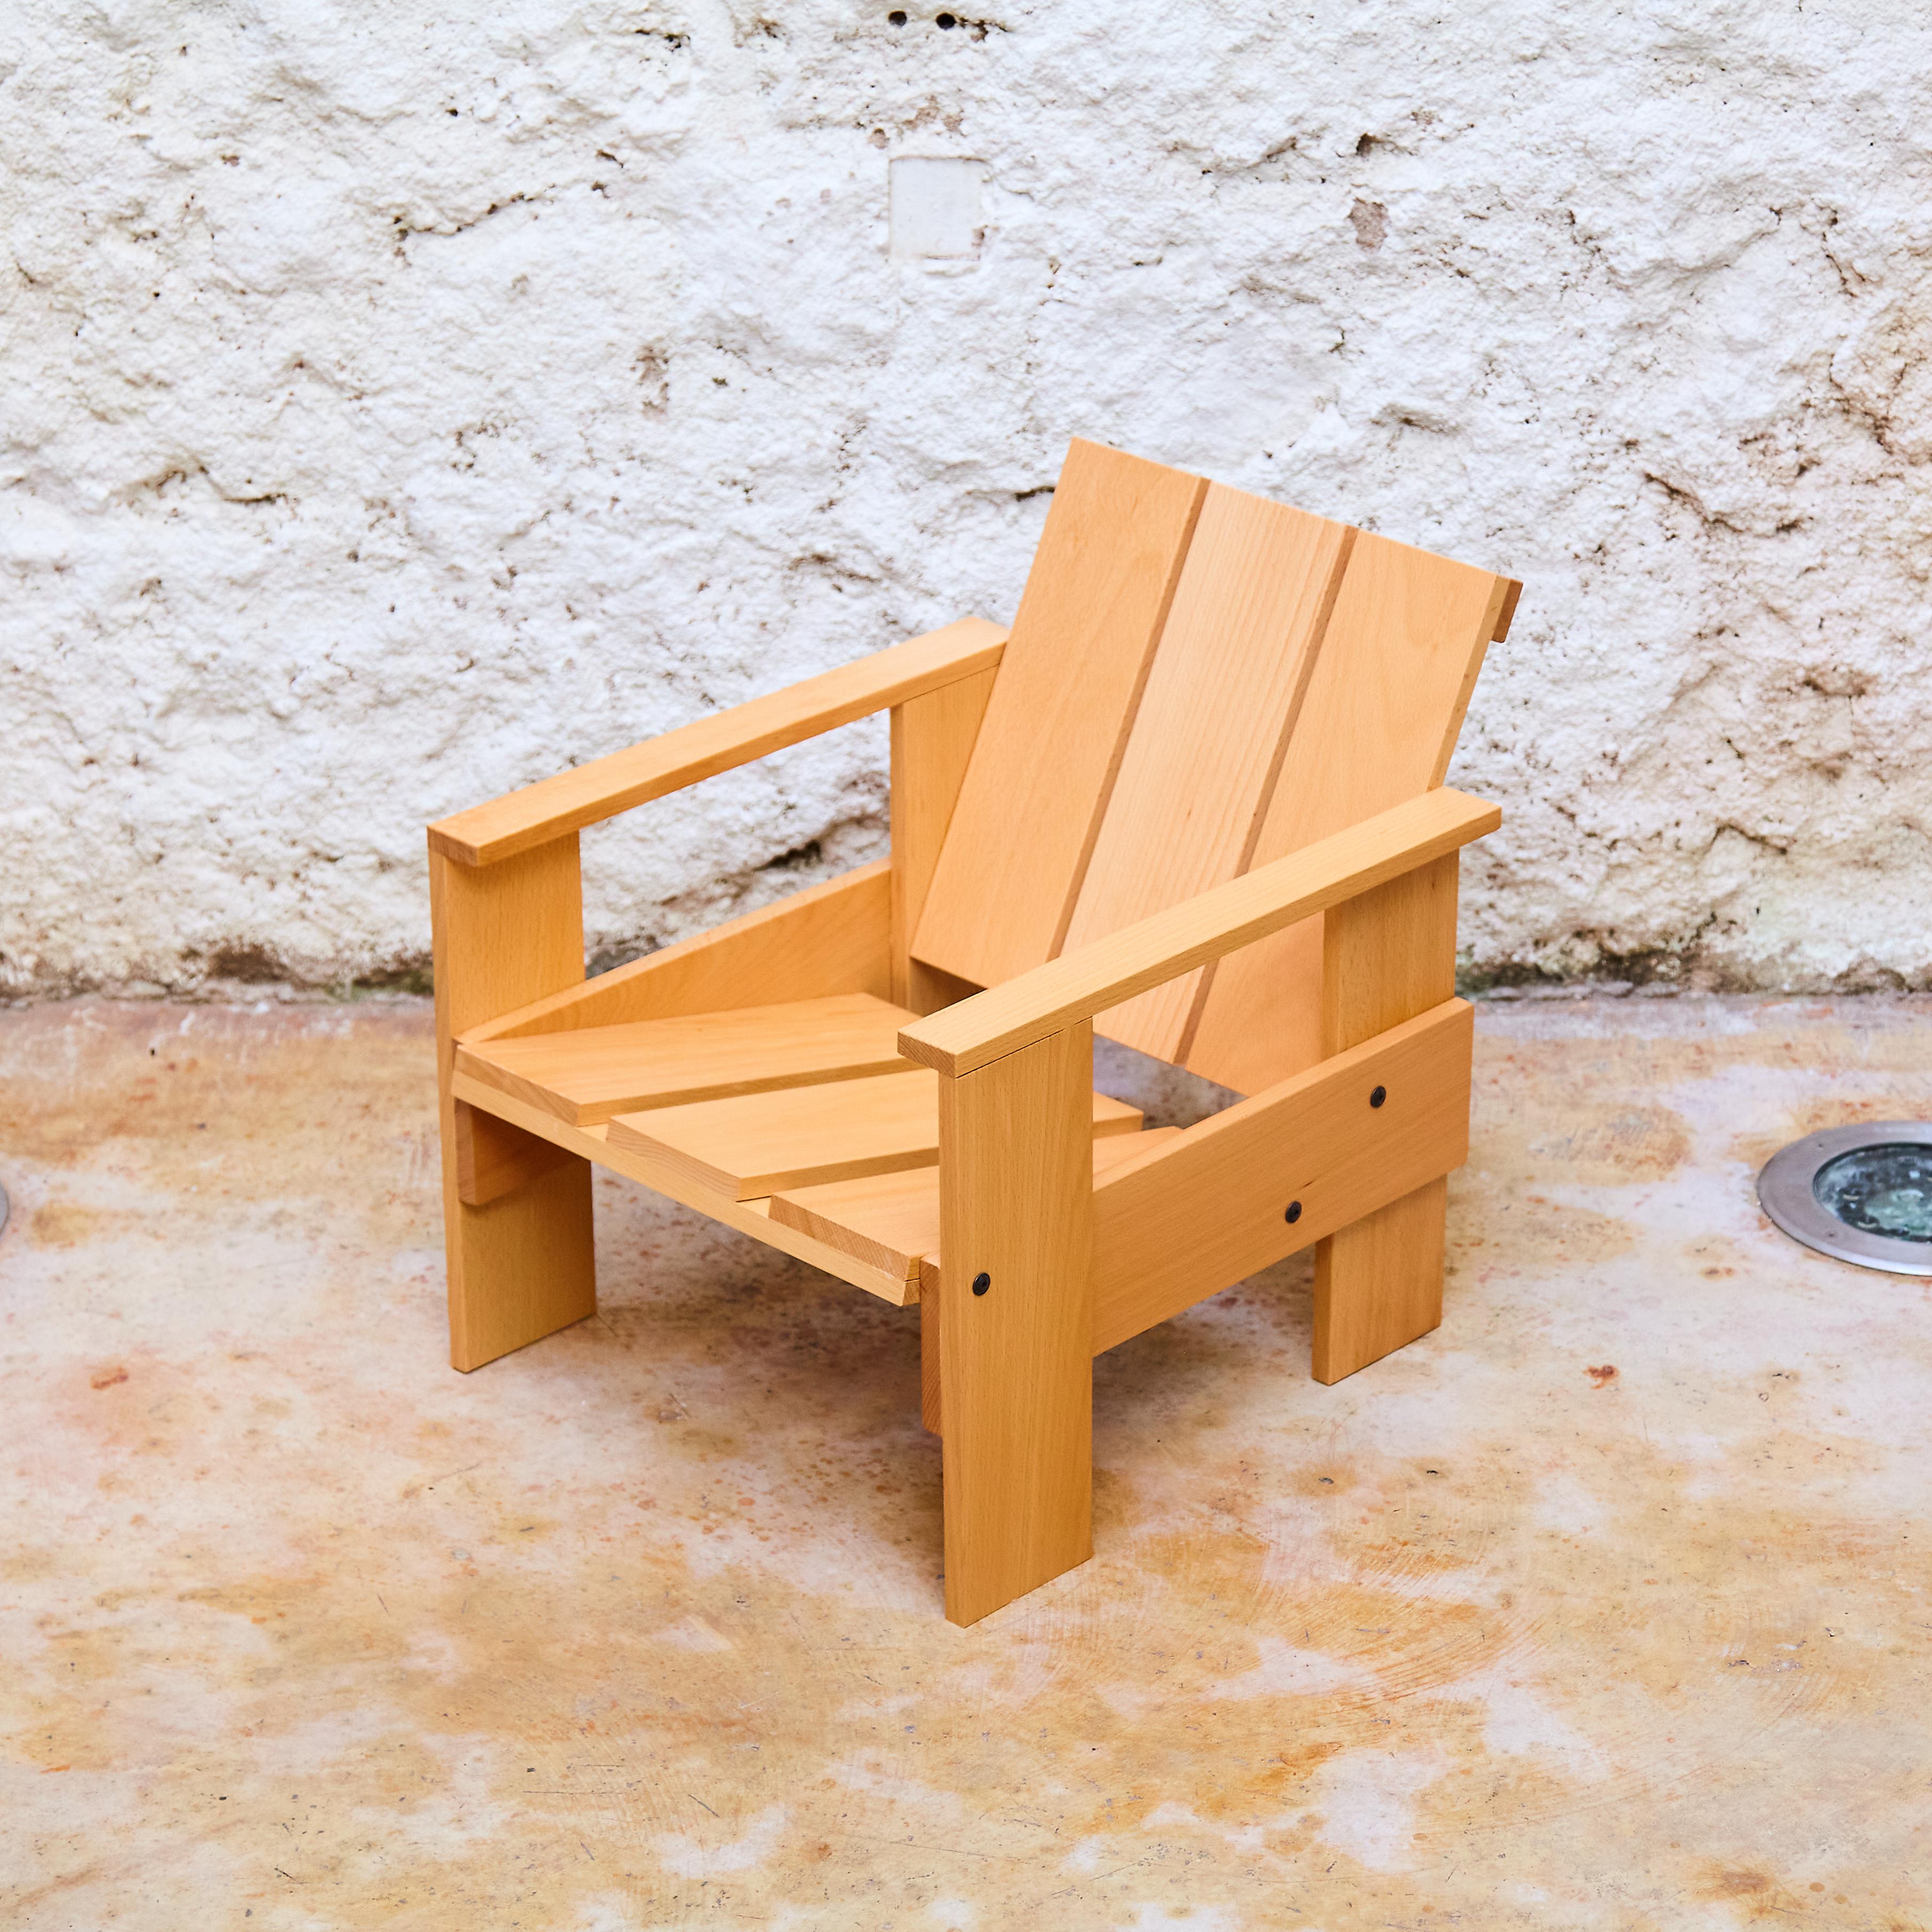 Gerrit Rietveld Wood Child Armchair 'Crate' by Rietveld by Rietveld, circa 2005 For Sale 4